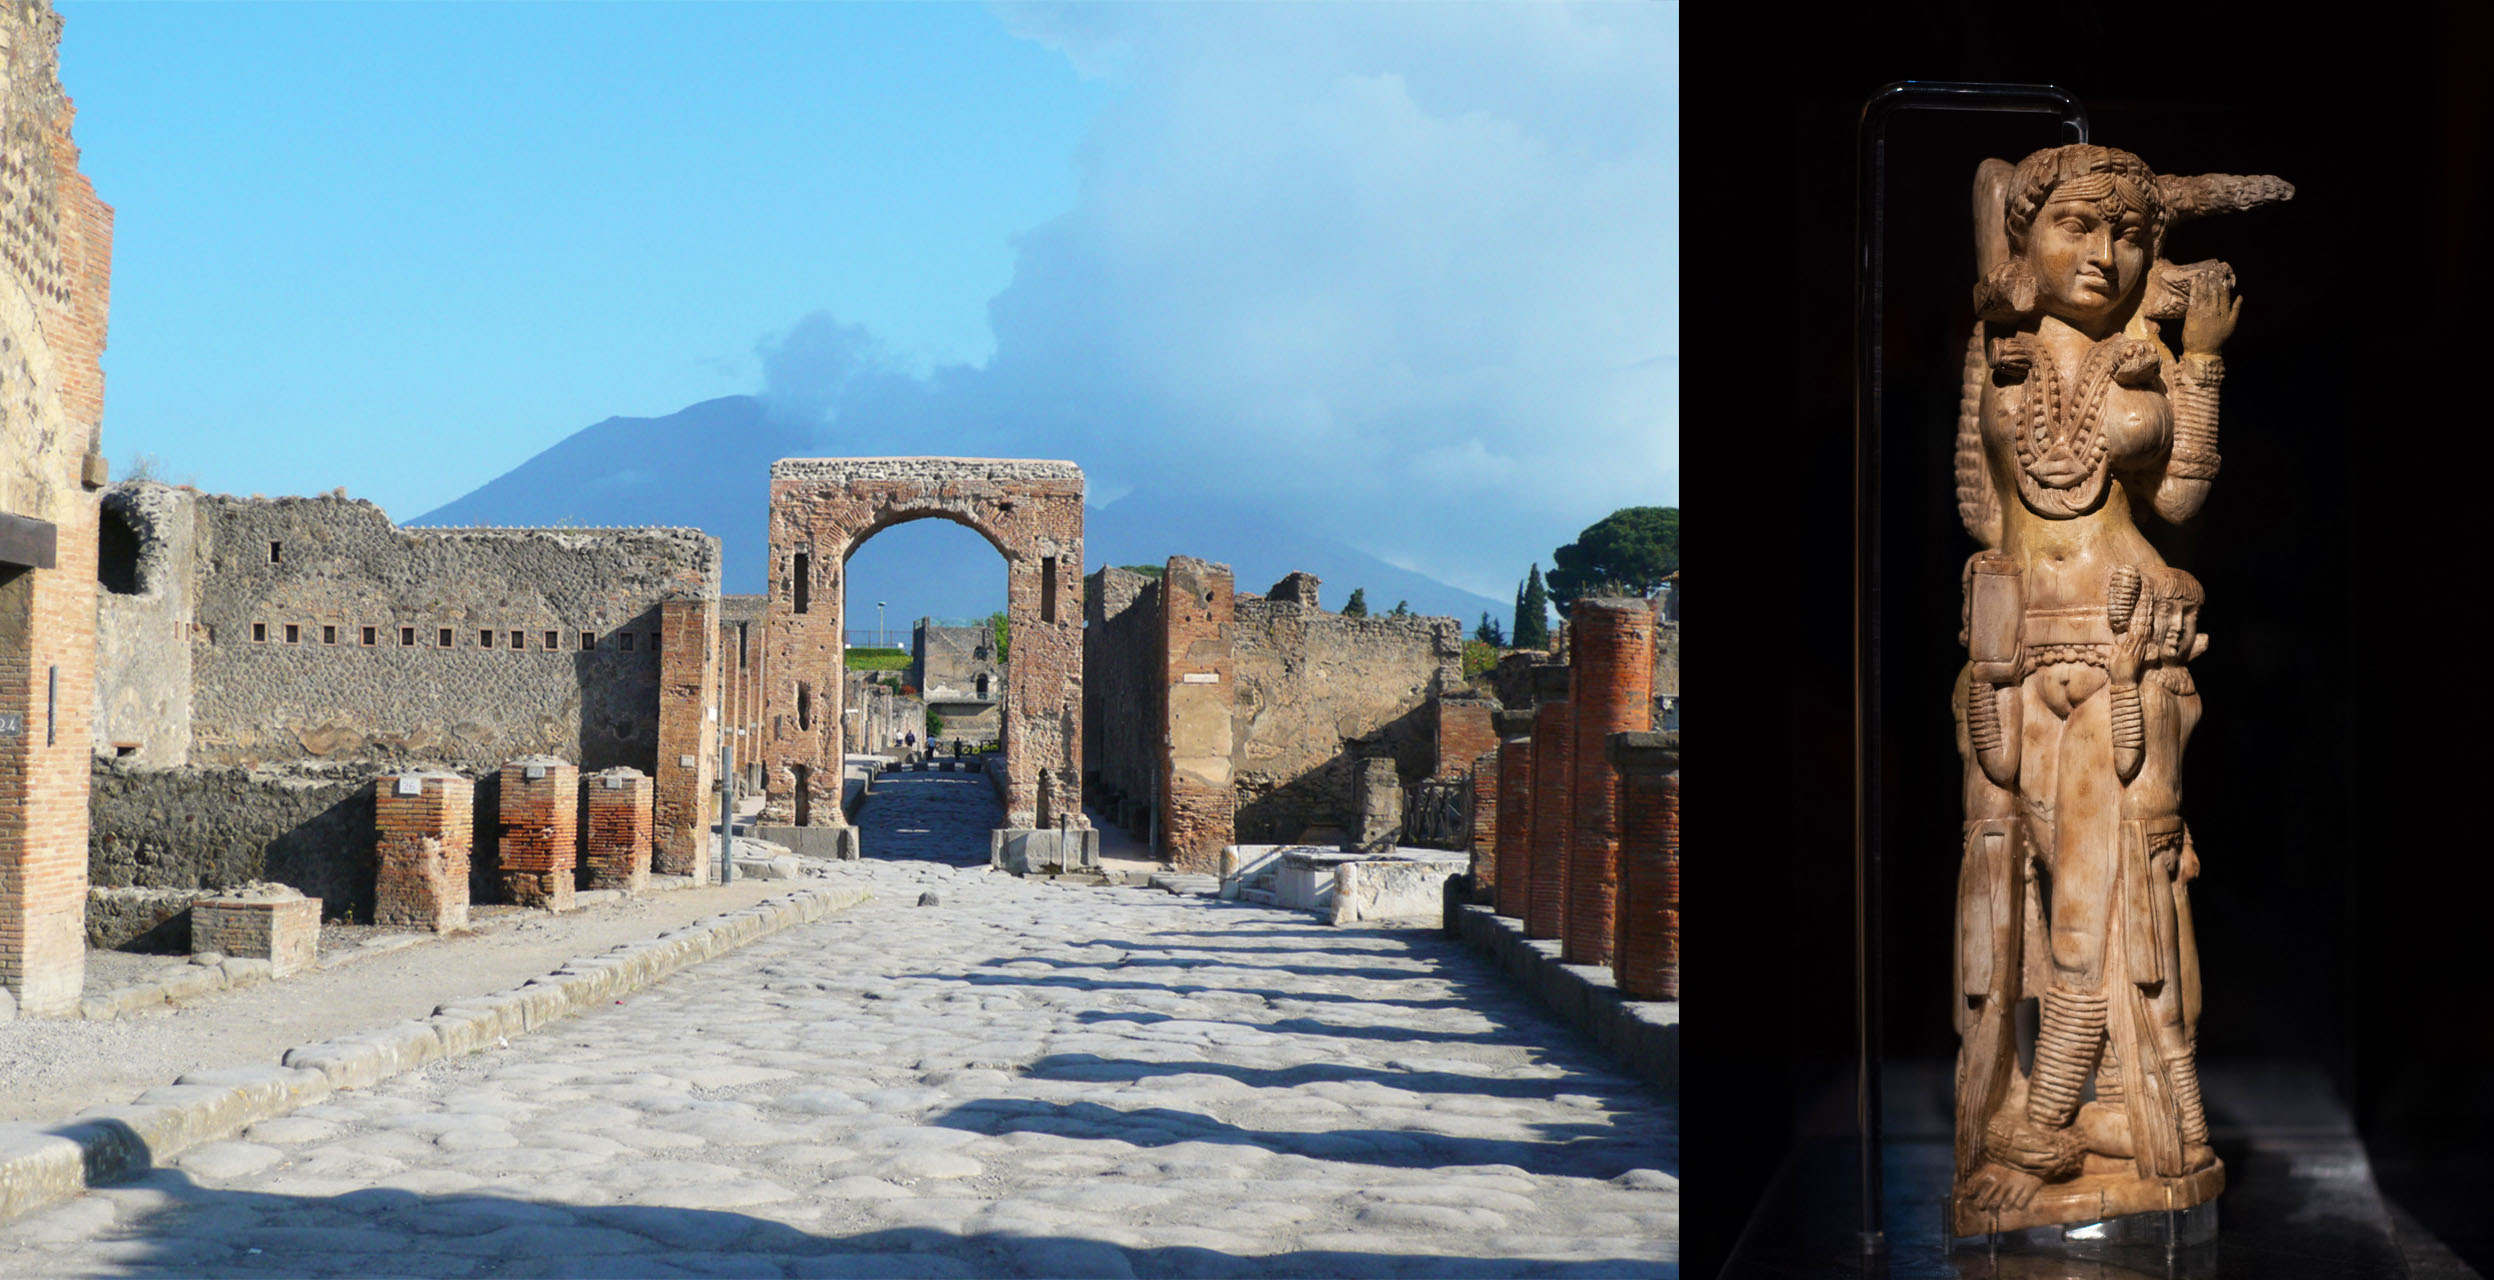 Transplanting India: Luxury and an Ivory Statuette in Pompeii